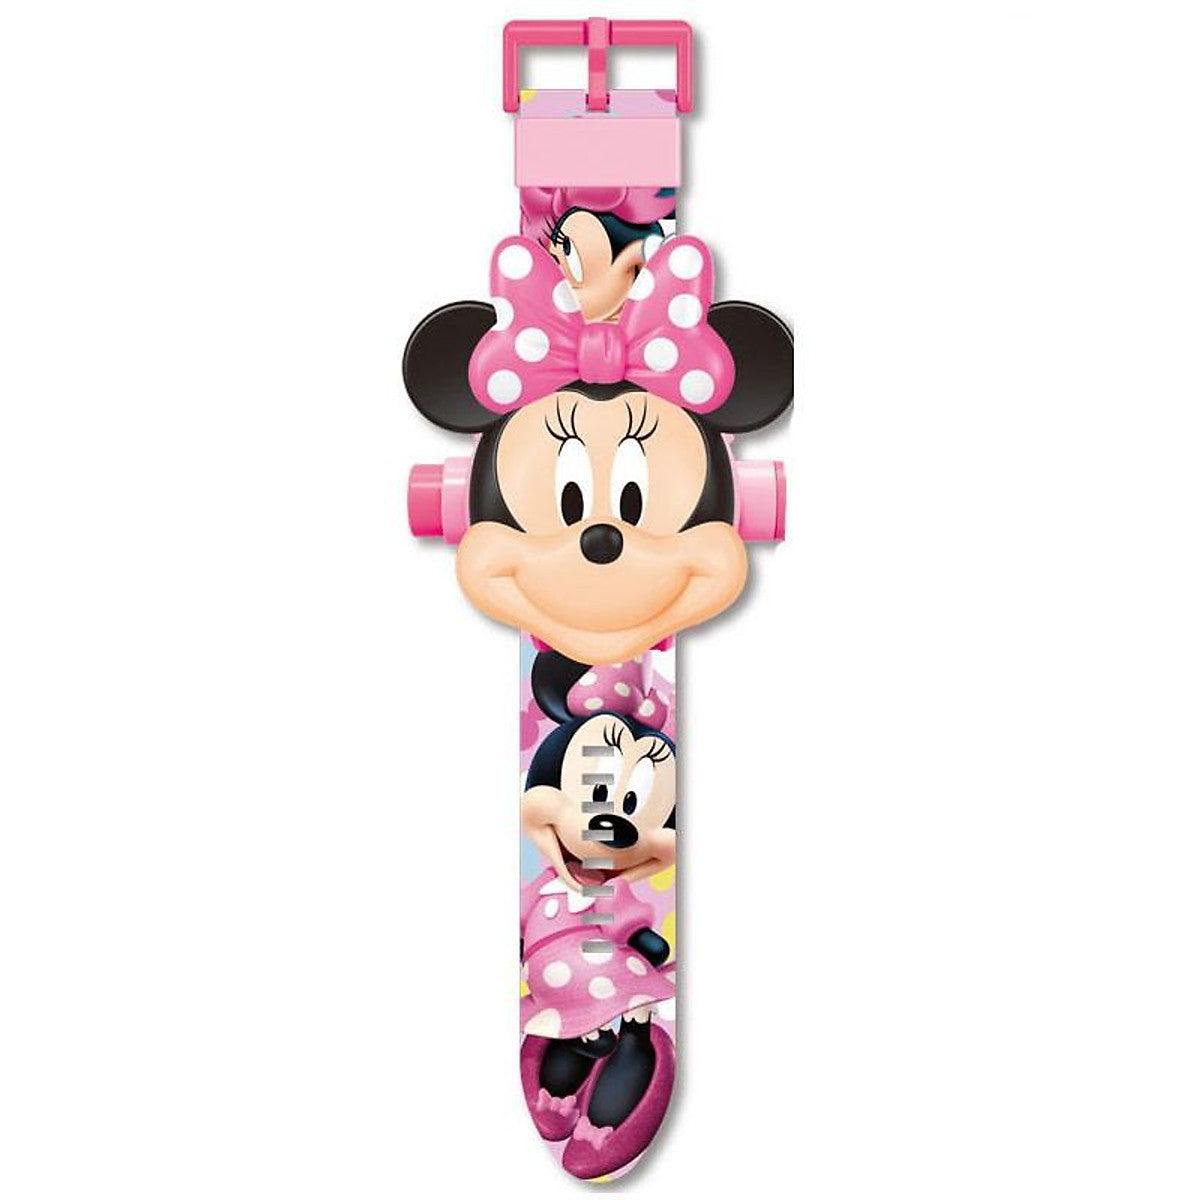 Projection children's watch - Minnie Mouse - 24 types of images of heroes .Projector Watch - BumbleToys - 5-7 Years, Boys, Girls, OXE, Toy Land, Wrist Watches